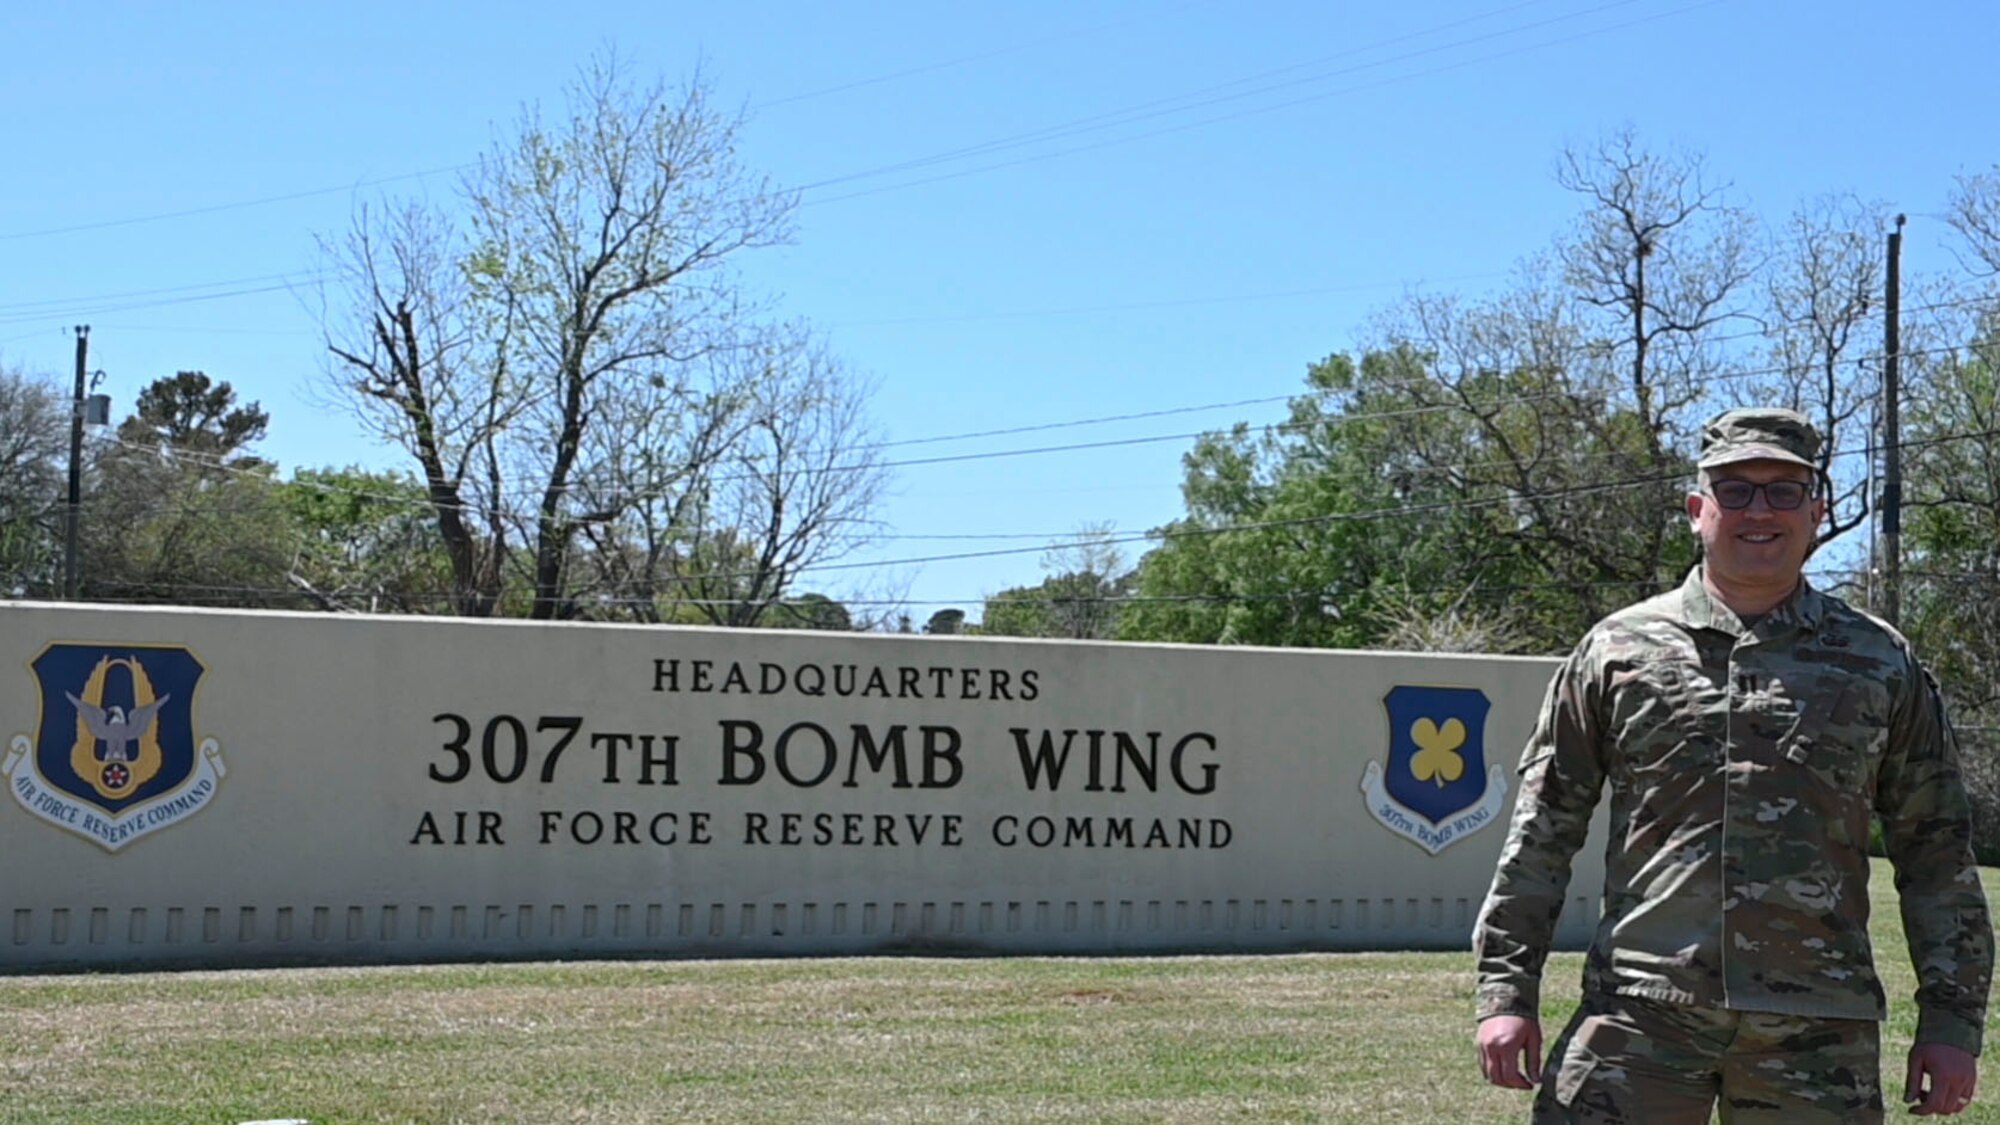 A man dressed in uniform stands in front of a sign.